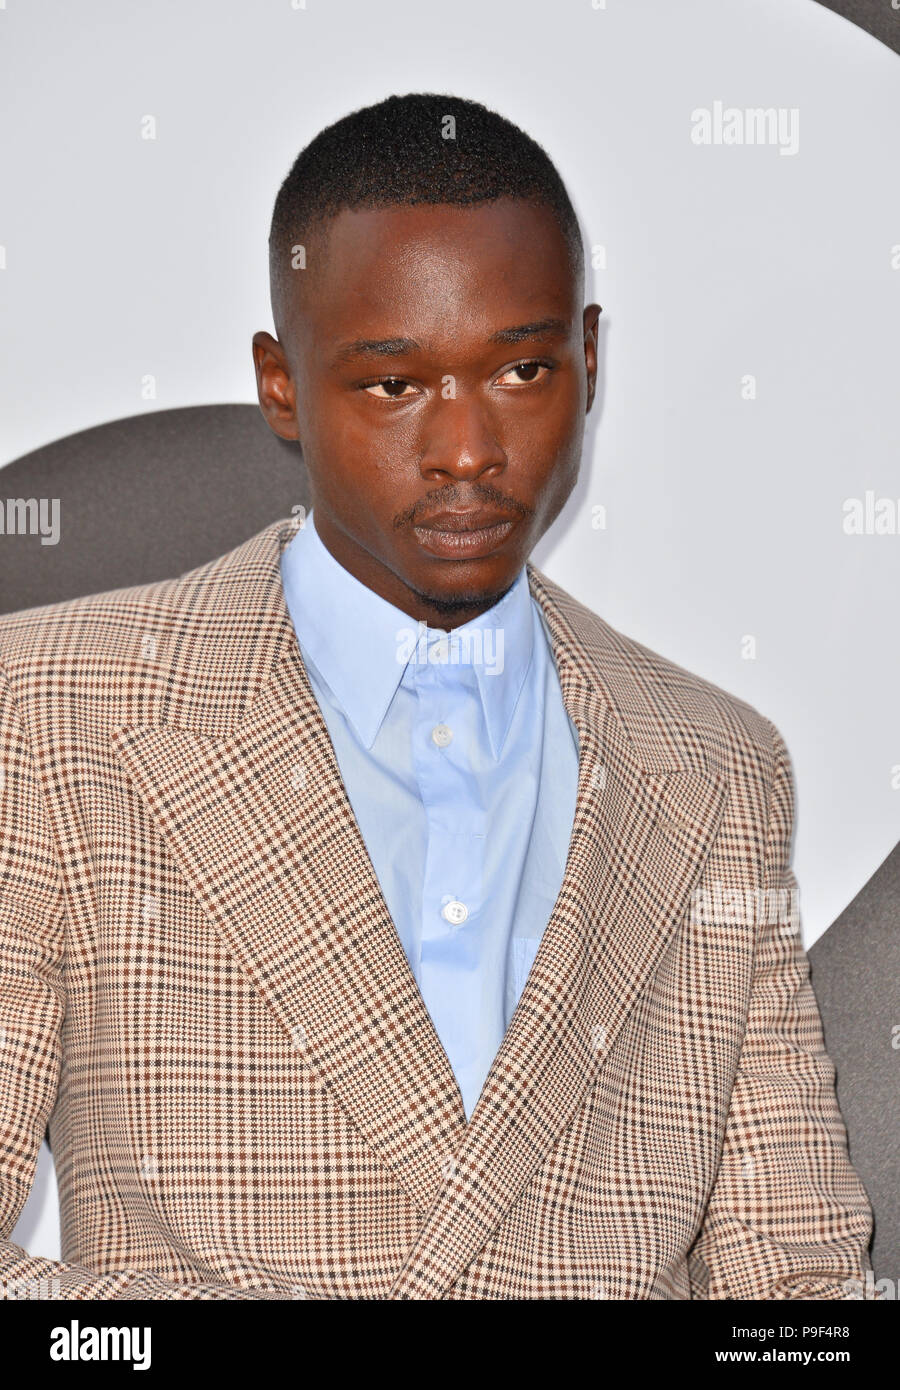 Los Angeles, USA. 17th July 2018. Ashton Sanders at the premiere for "The Equalizer  2" at the TCL Chinese Theatre Picture: Sarah Stewart Credit: Sarah  Stewart/Alamy Live News Stock Photo - Alamy